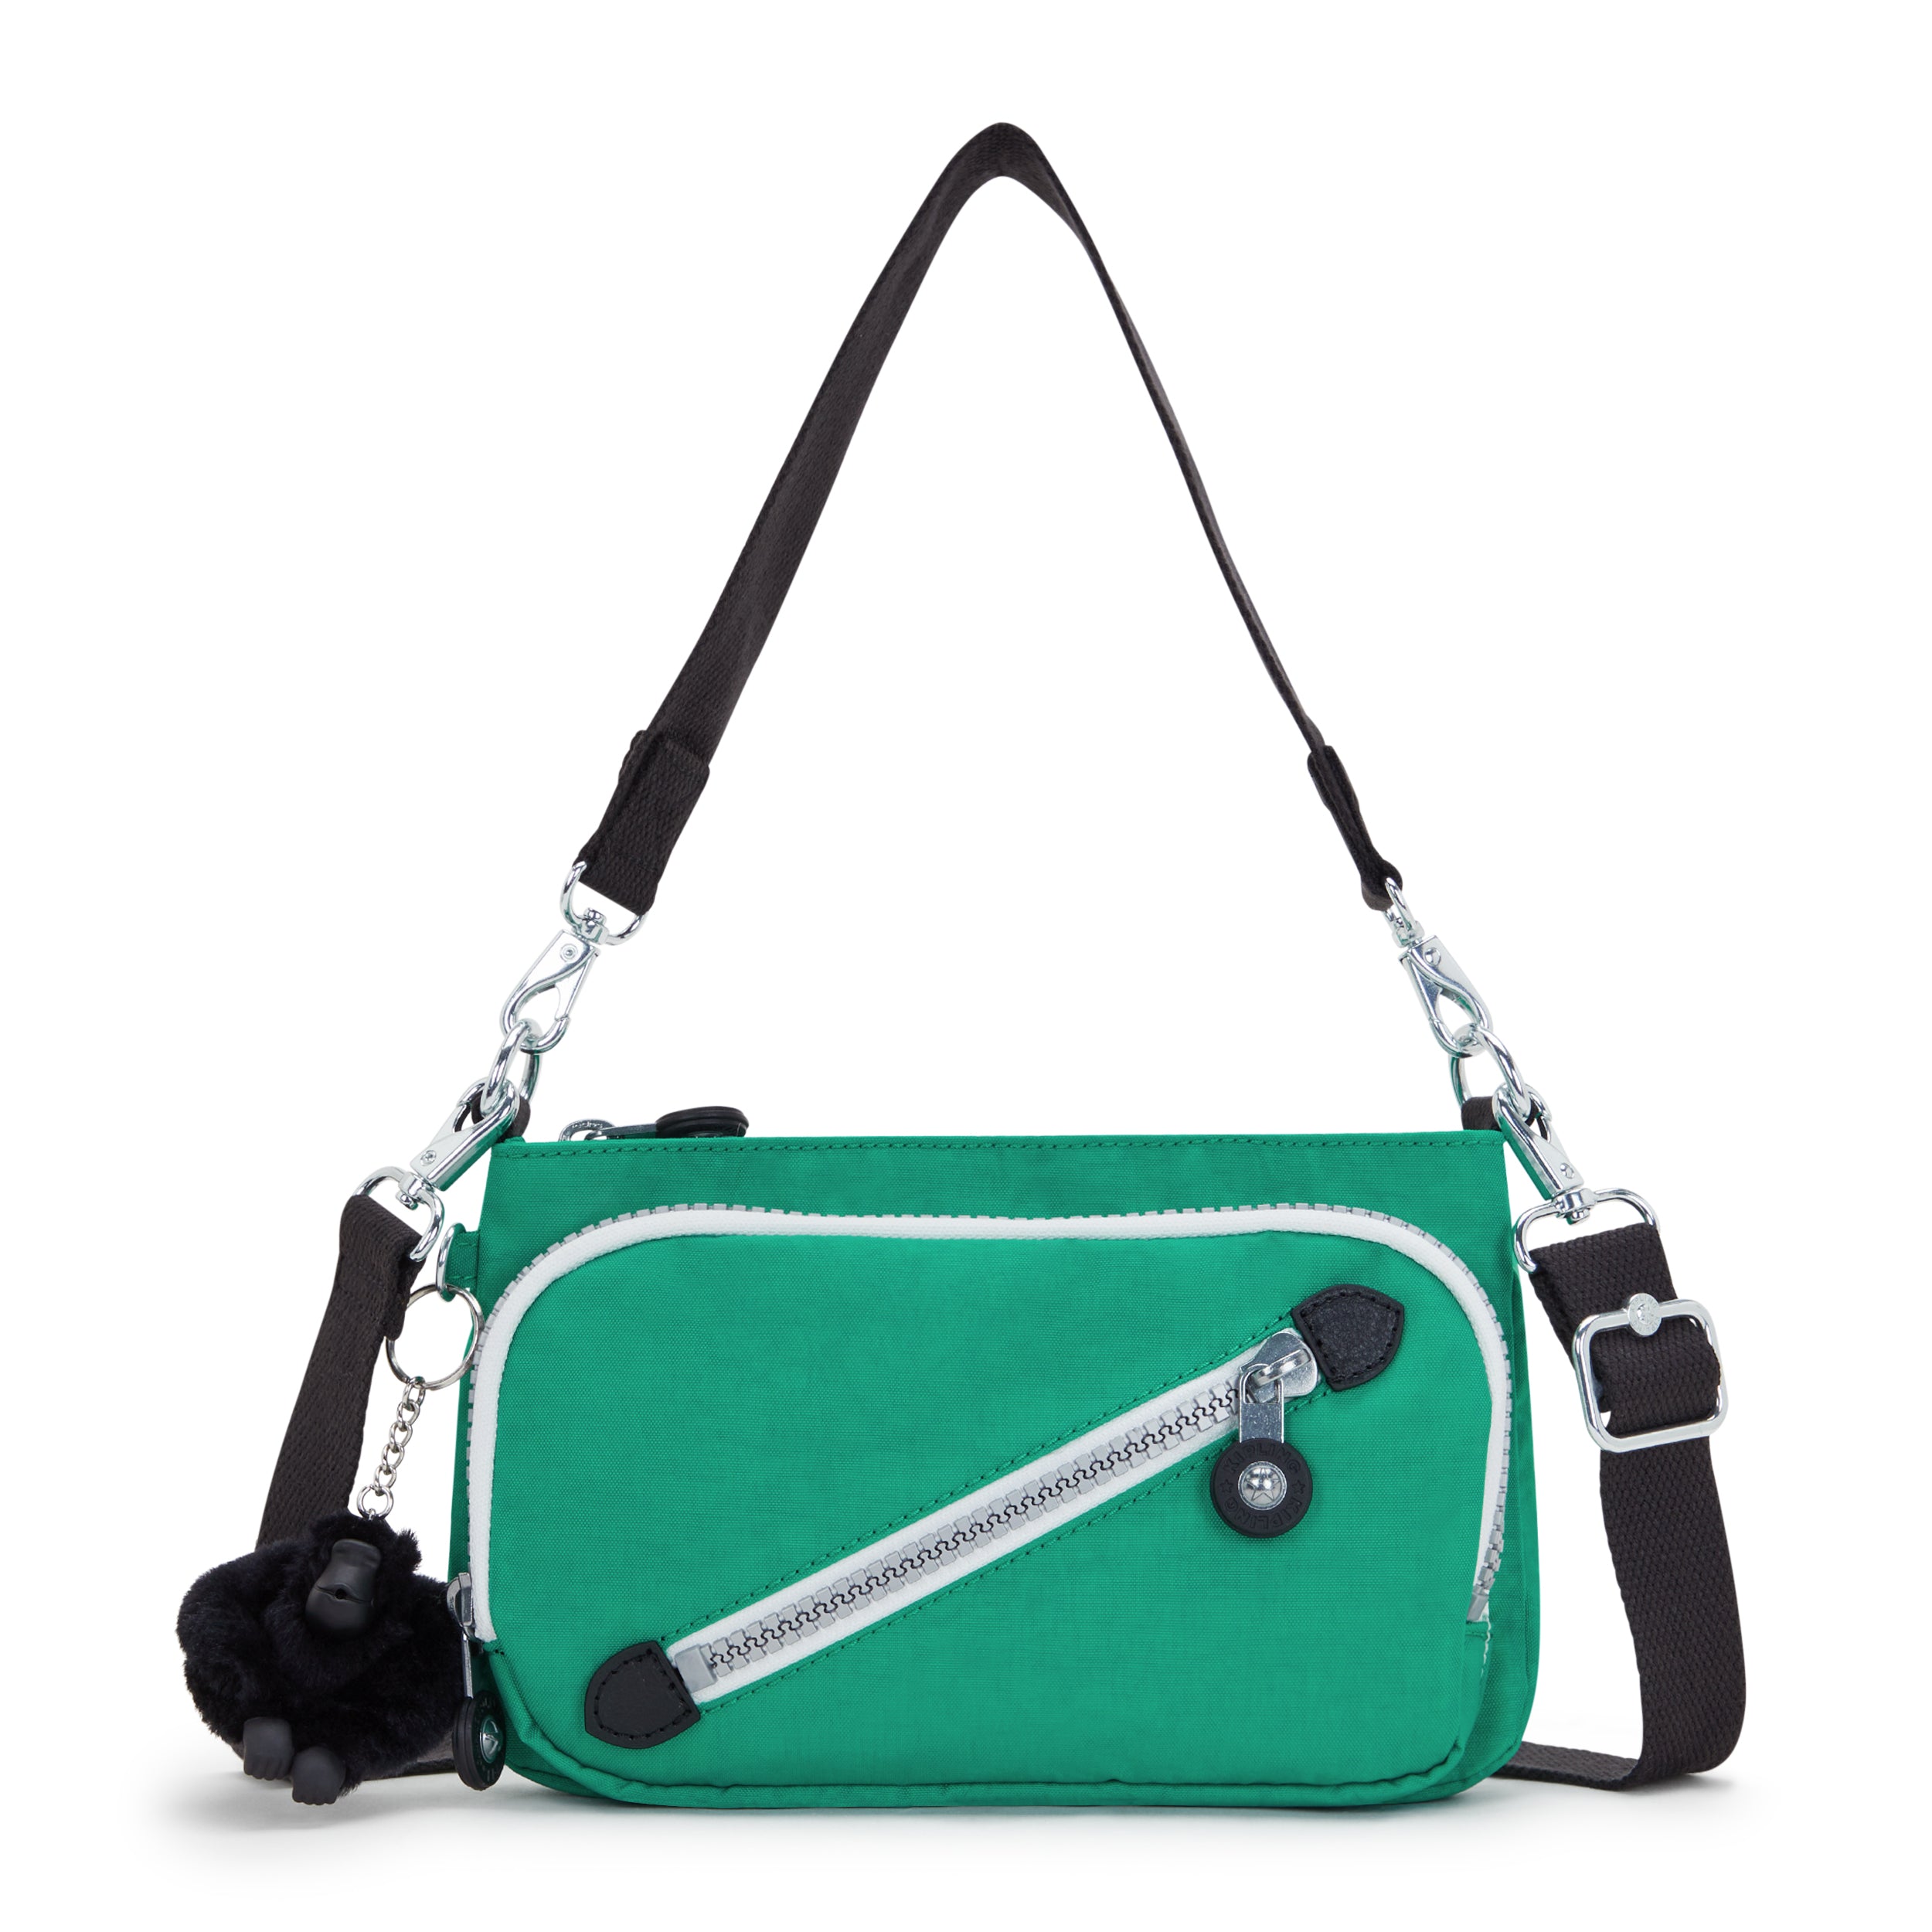 KIPLING-New Milos-Small shoulderbag (with removable strap)-Rapid Green-I4874-AG4